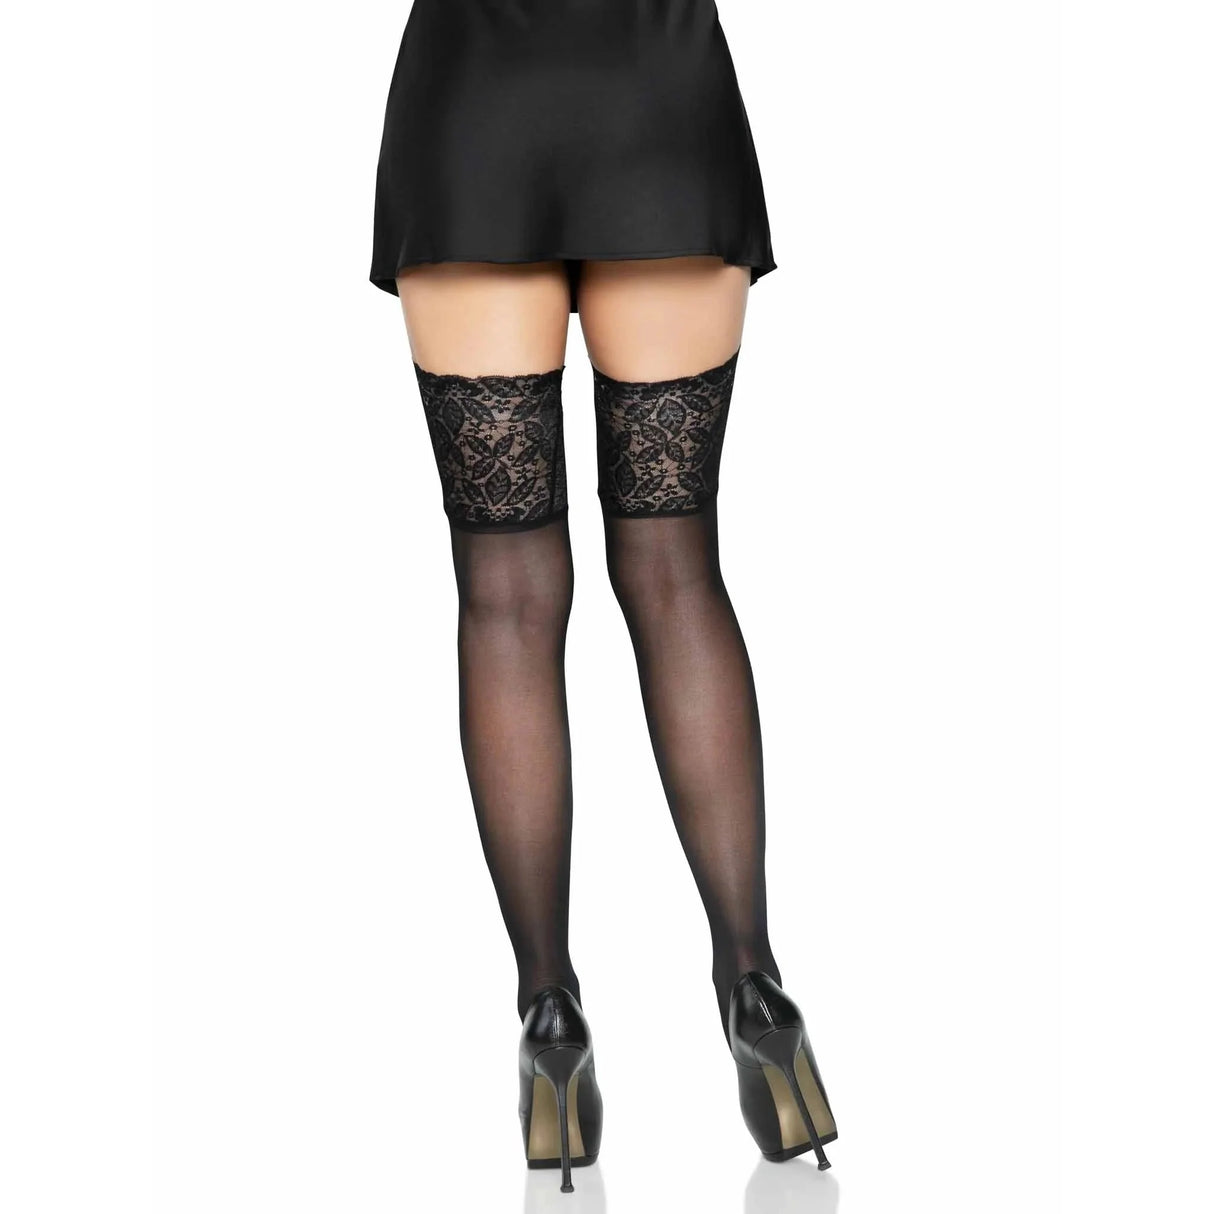 Leg Avenue Stay Up Sheer Thigh Highs